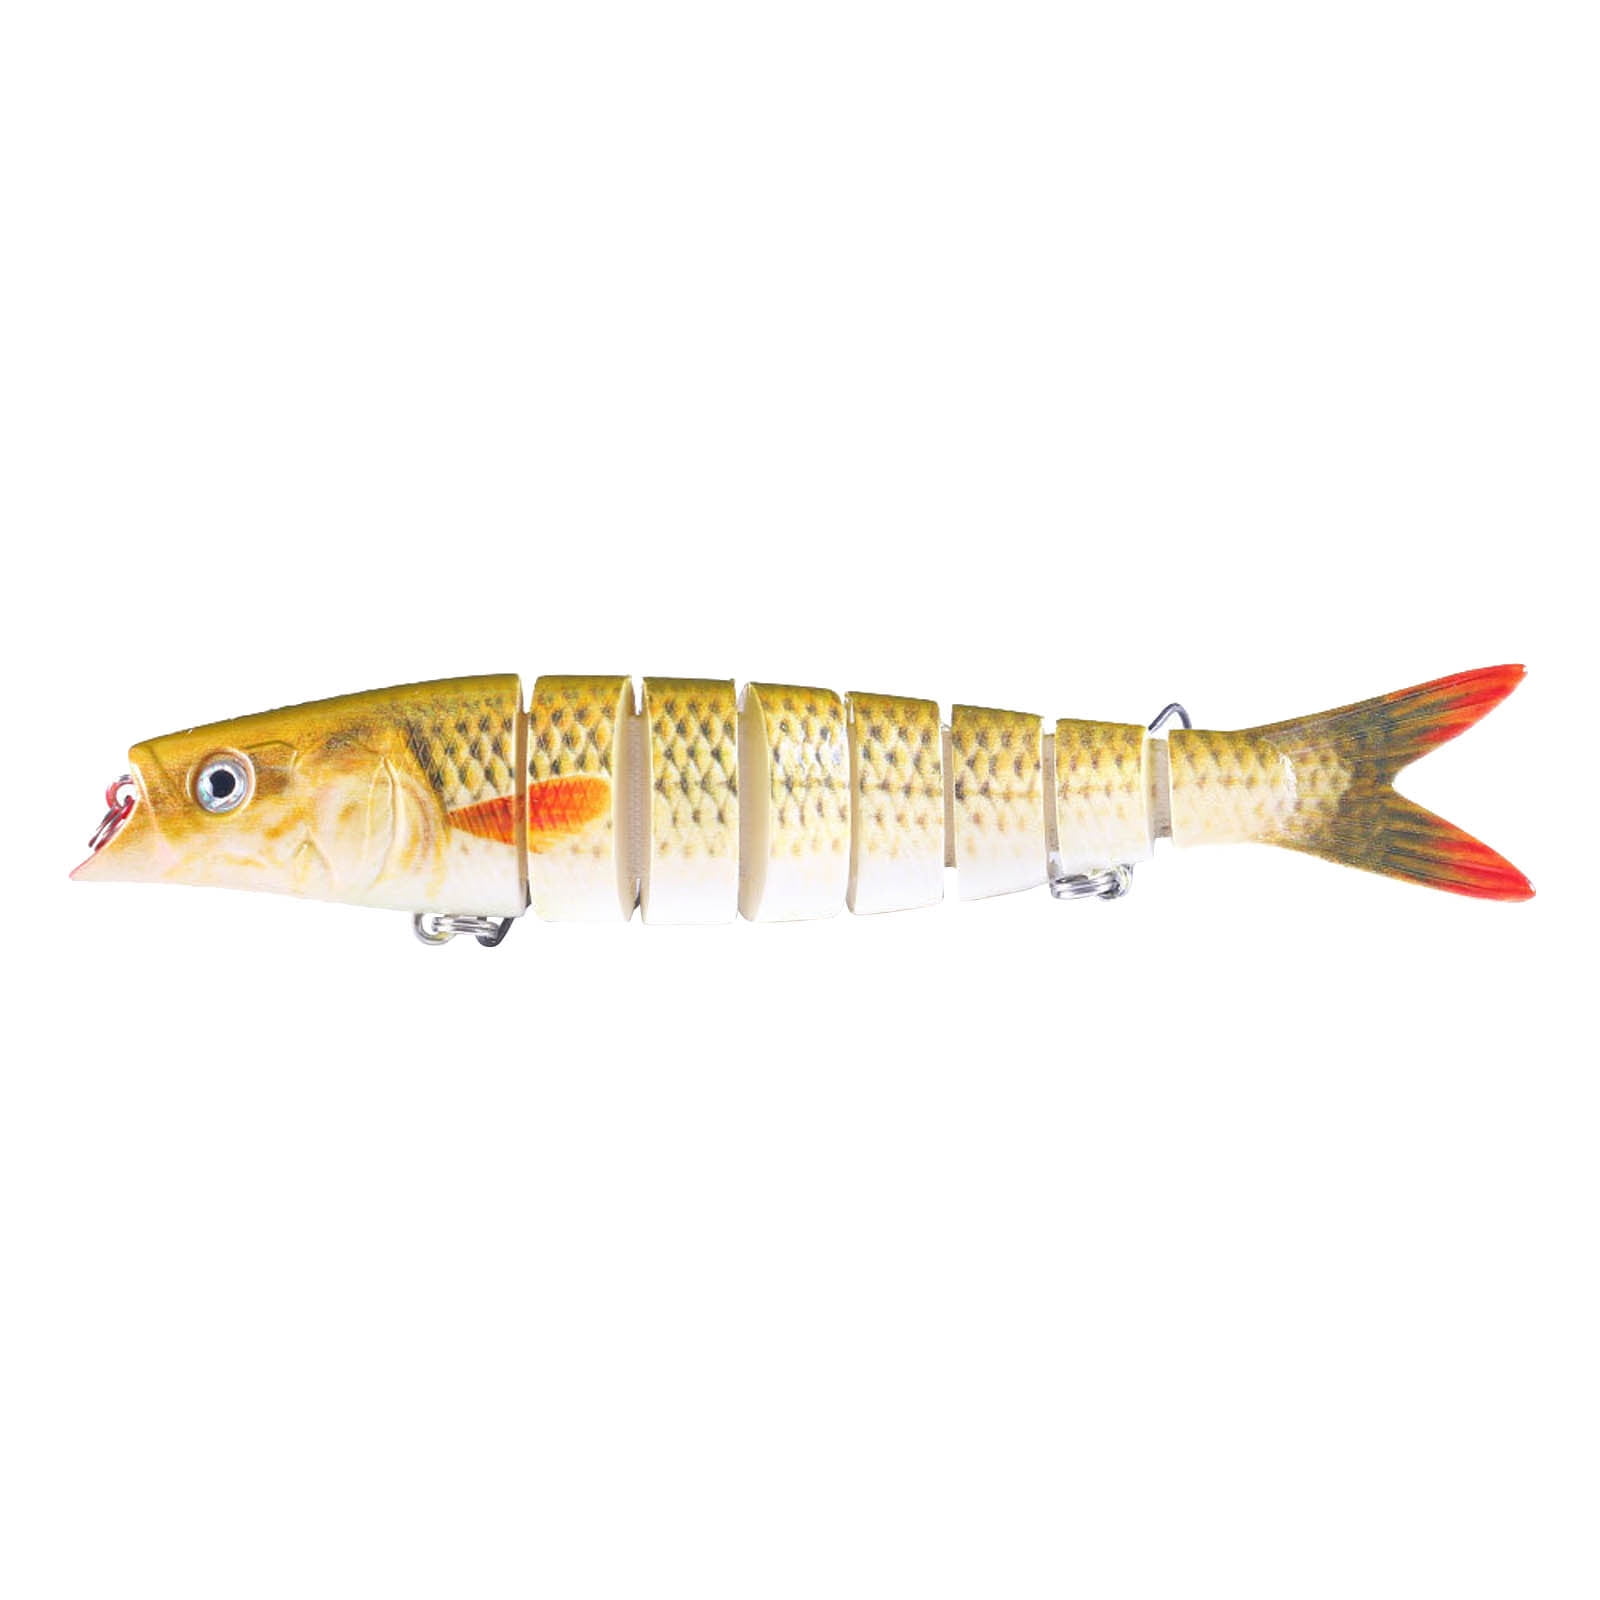 SHENGXINY Outdoor & Sport Clearance 13.5Cm Fishing Knotty Fake Bait Bait  Outdoor Fishing Equipment Sea Fishing Bait, Fishing Lures Kit For  Freshwater Bait Multicolor 